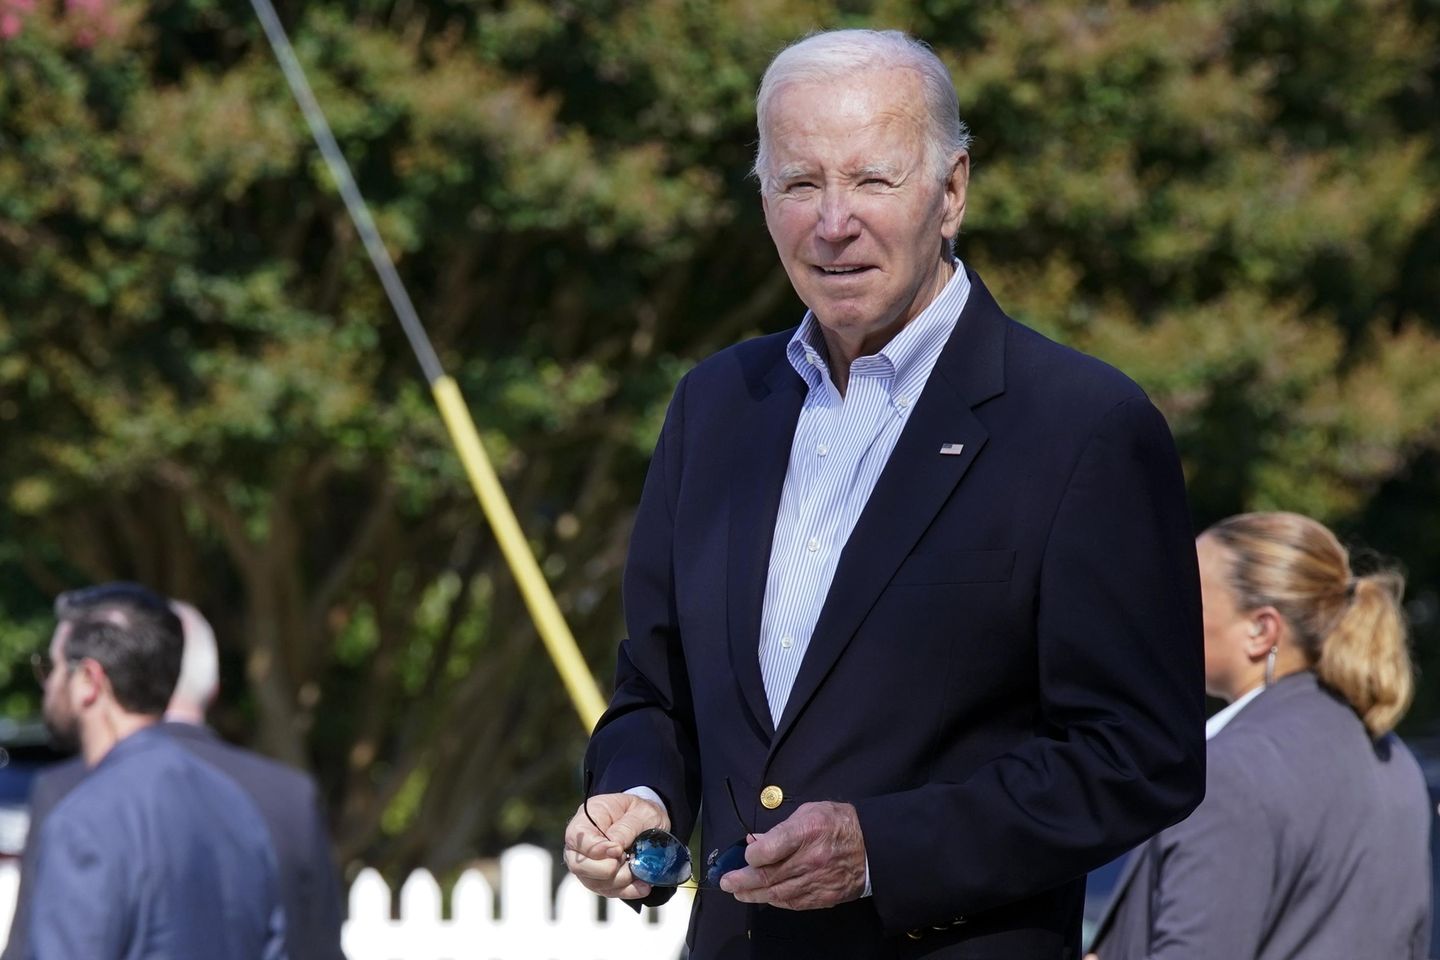 Democrat says no evidence Biden involved in business deals, just said 'hello' at meetings